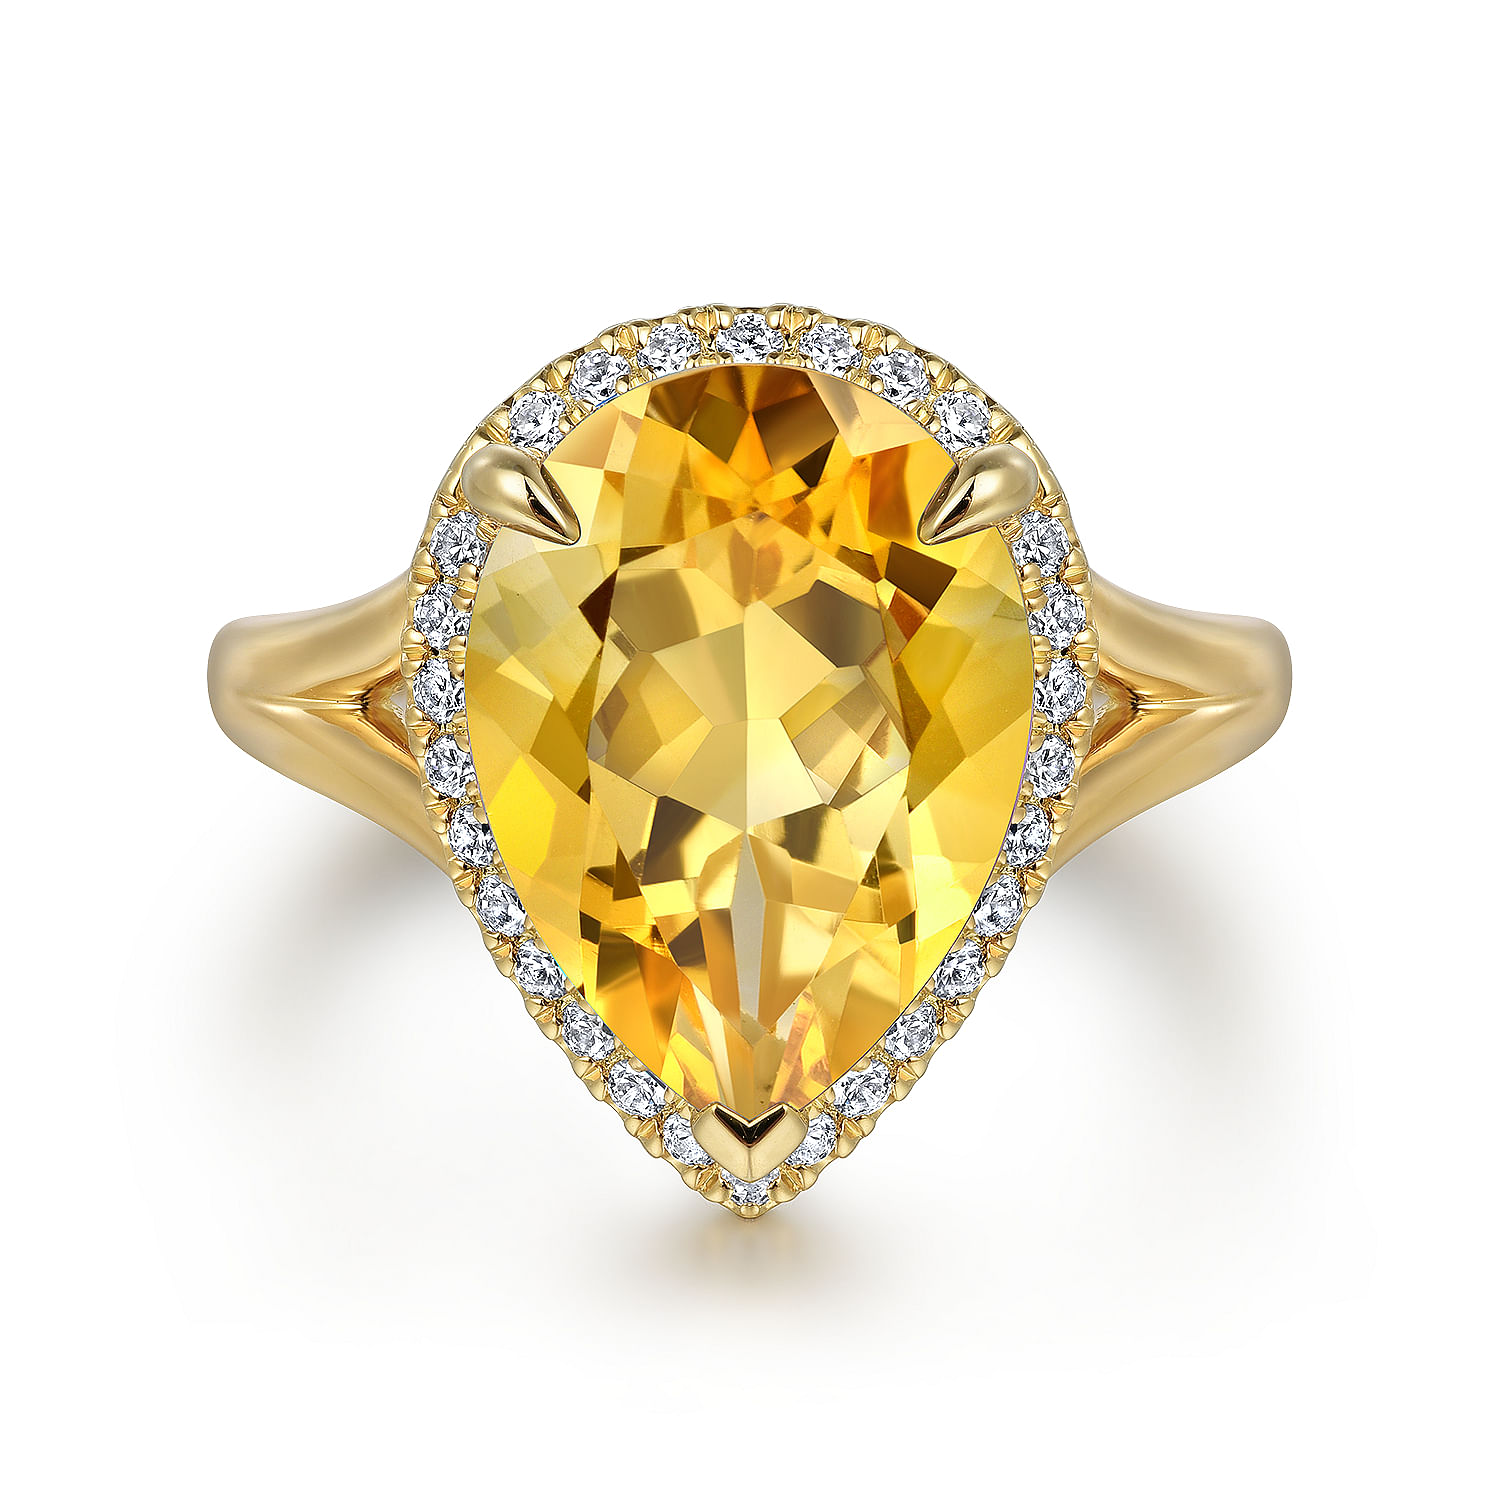 14K Yellow Gold Diamond and Flat Pear Shape Citrine Ladies Ring With Flower Pattern Gallery